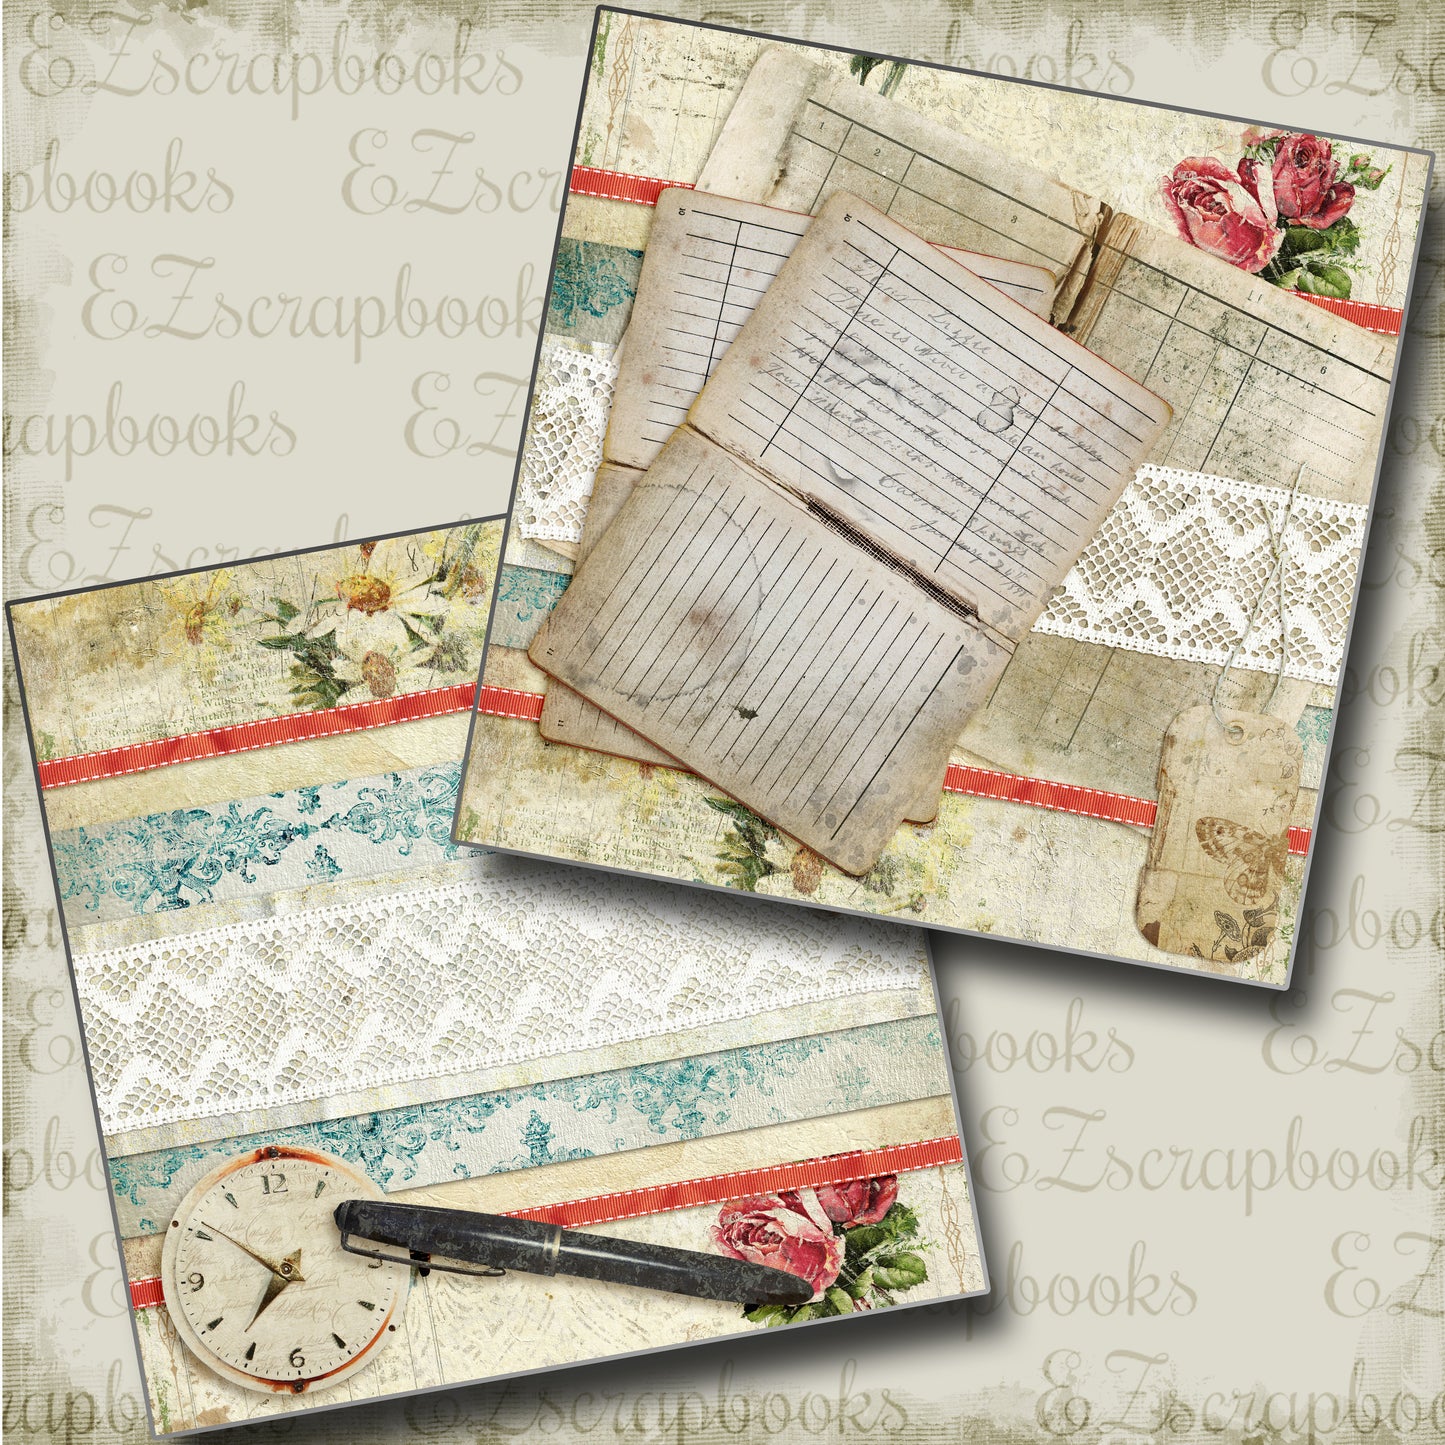 As Time Goes By NPM - 4581 - EZscrapbooks Scrapbook Layouts Grandmother, Heritage